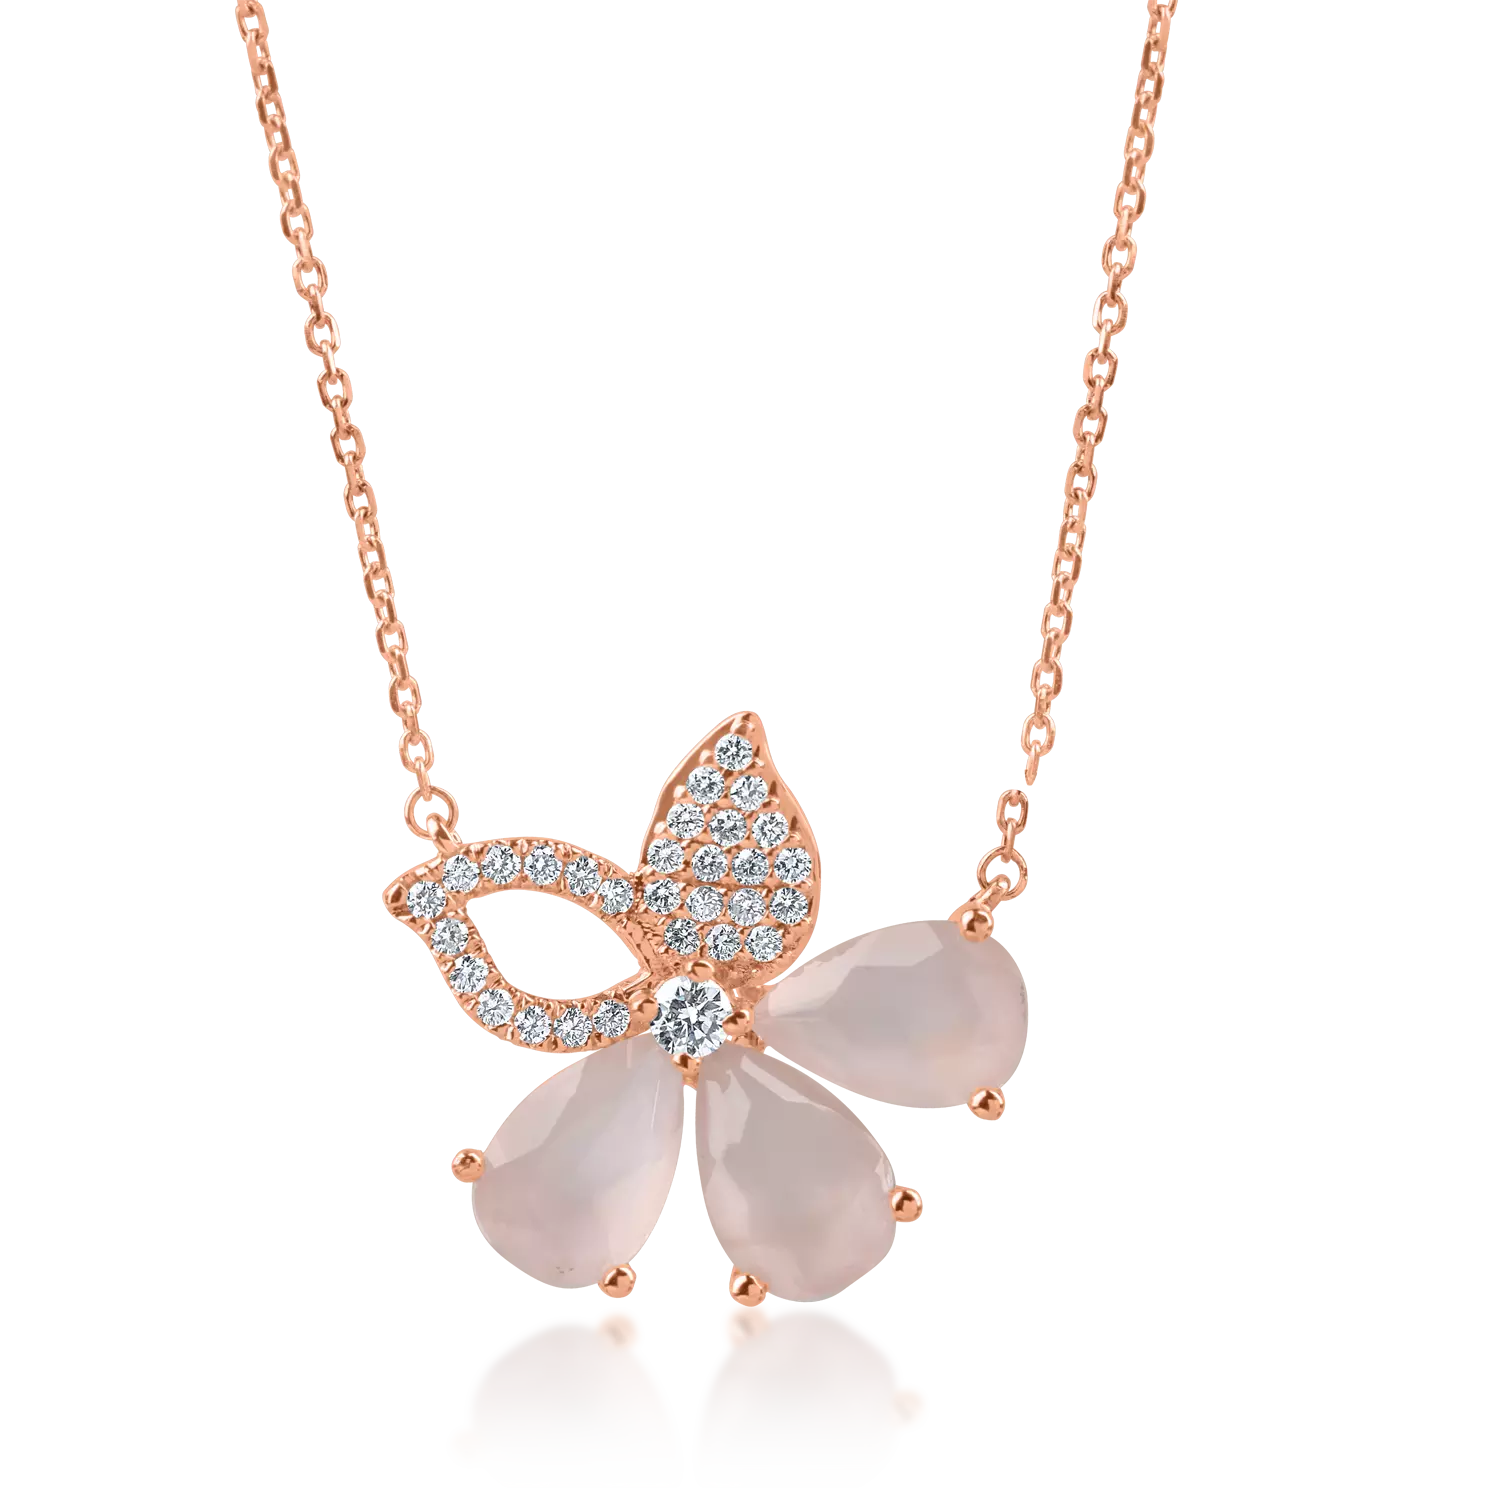 Rose gold flower pendant chain with 3.12ct rose quartz and 0.29ct diamonds